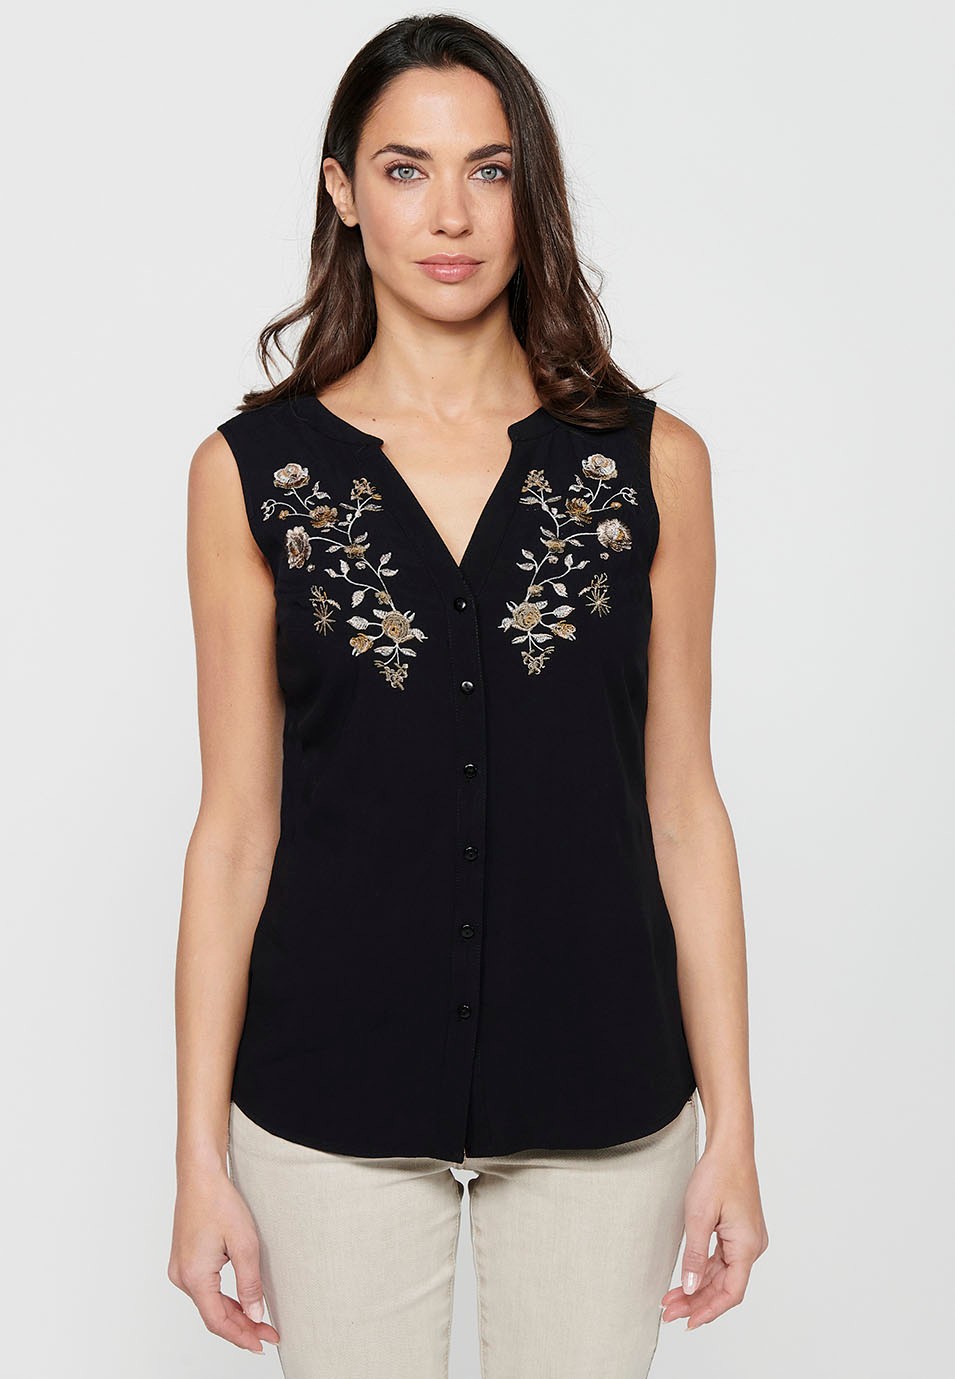 Sleeveless Blouse with V-neckline and Front Closure with Buttons with Embroidered Front Detail in Black for Women 3